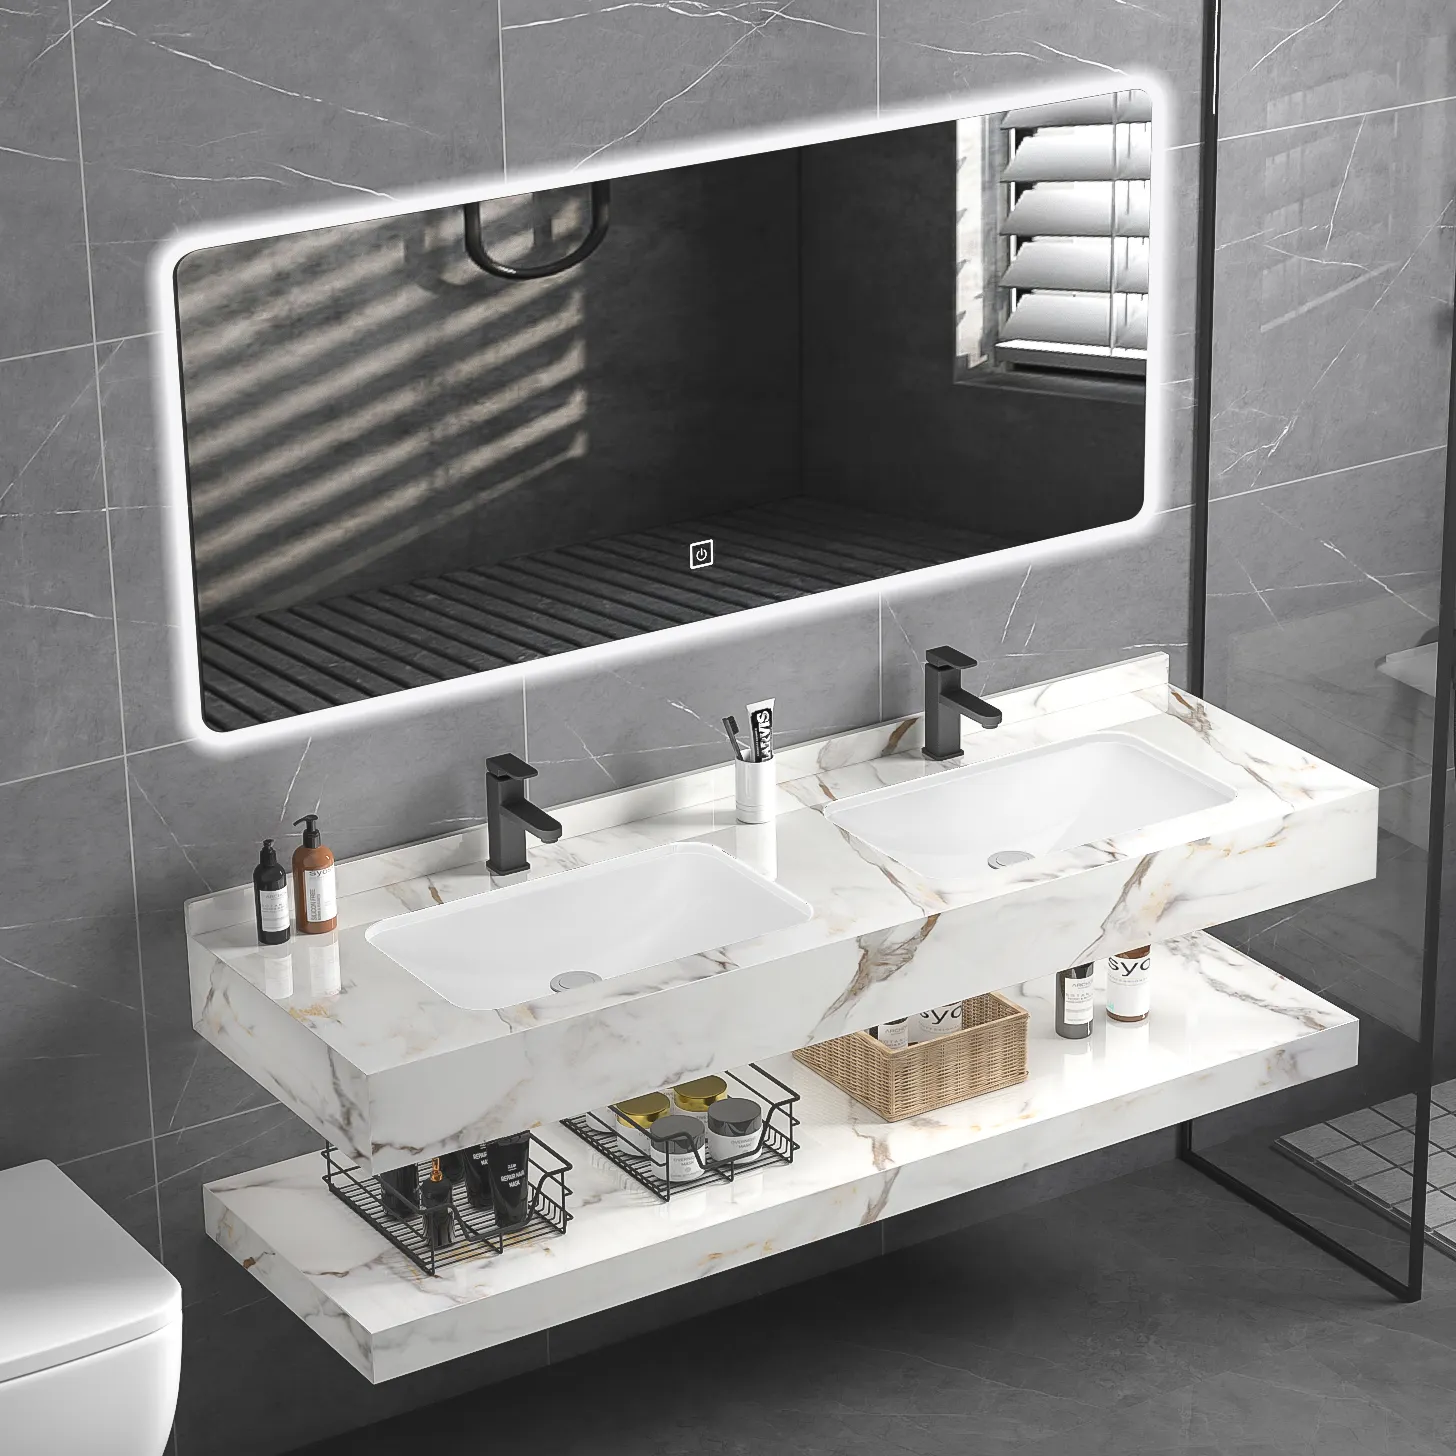 Luxury sintered stone sanitary ware wall mounted save space bathroom cabinet vanity with double bathroom sinks